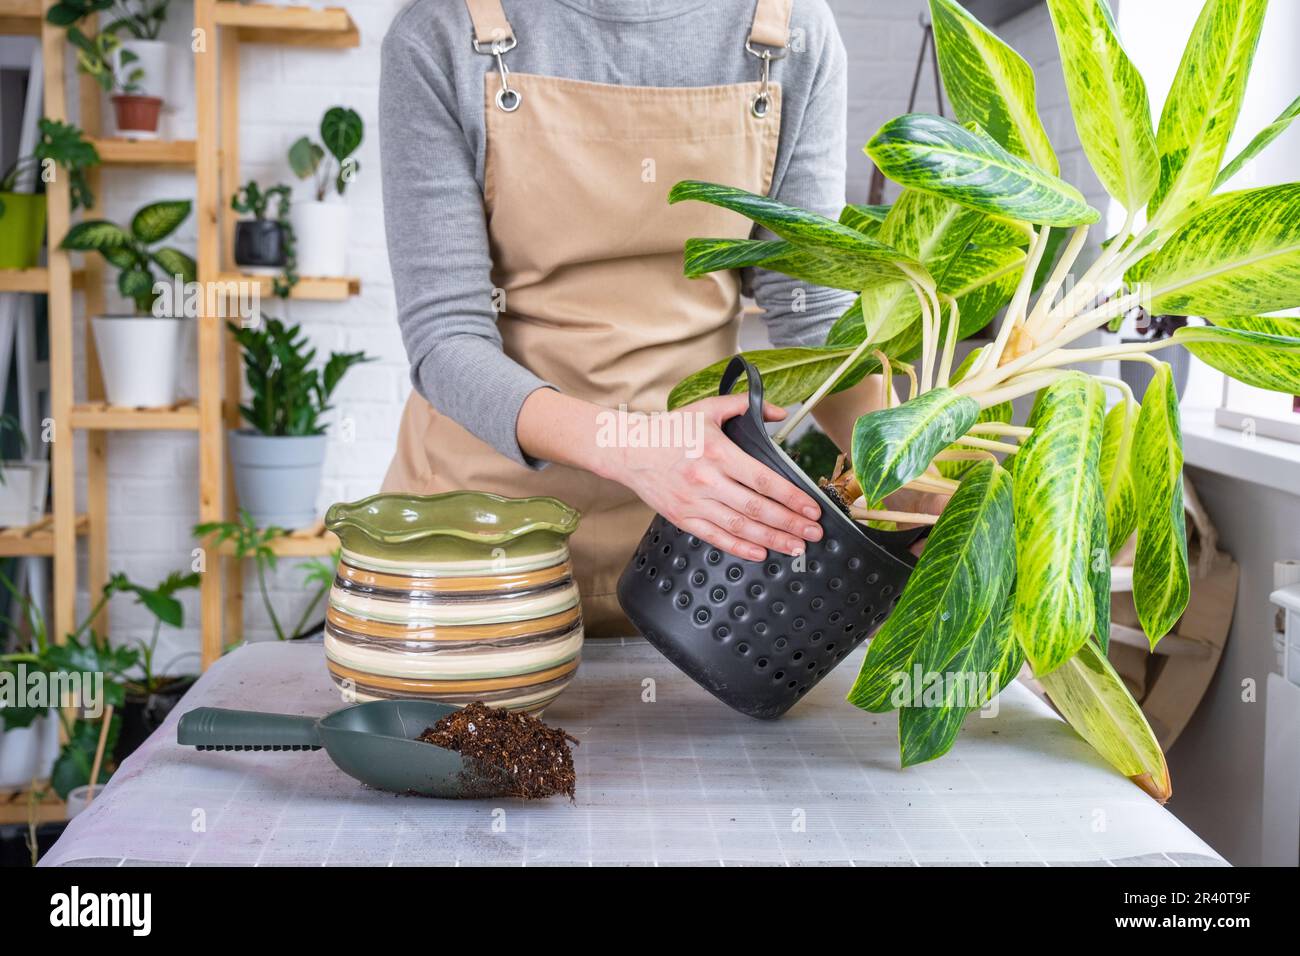 Repotting a home plant aglaonema into new pot in home interior. Woman in an apron Caring for a potted plant Stock Photo